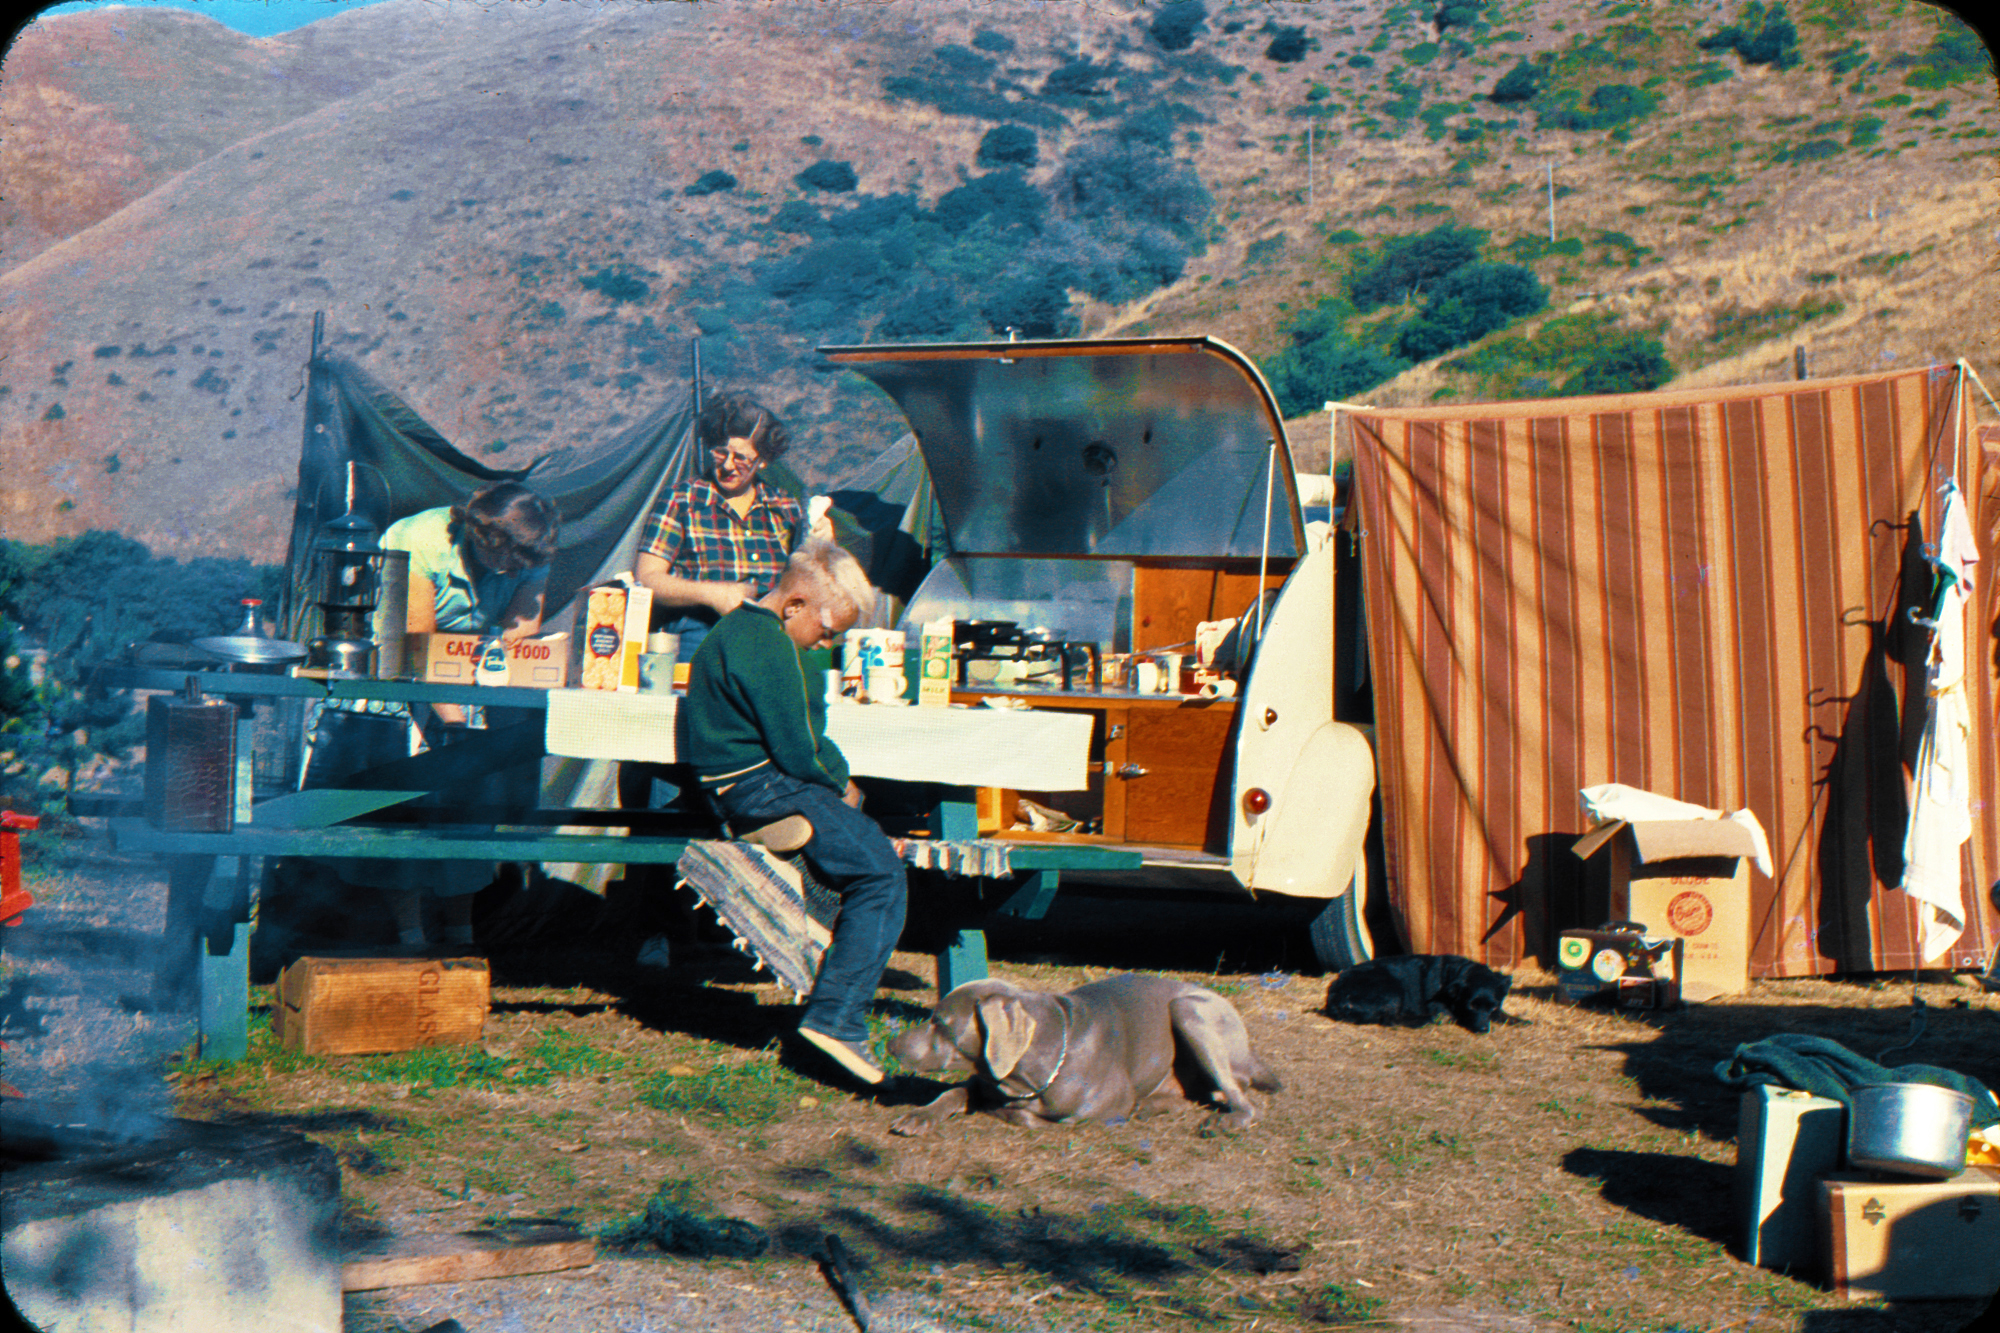 Bill Bliss and his family again, enjoying a little outdoor cooking sometime in the mid-fifties. I'm not sure where this is  but I'm guessing somewhere up the Pacific coast. 35mm Anscochrome color slide. Here's another photo of their trip. View full size.